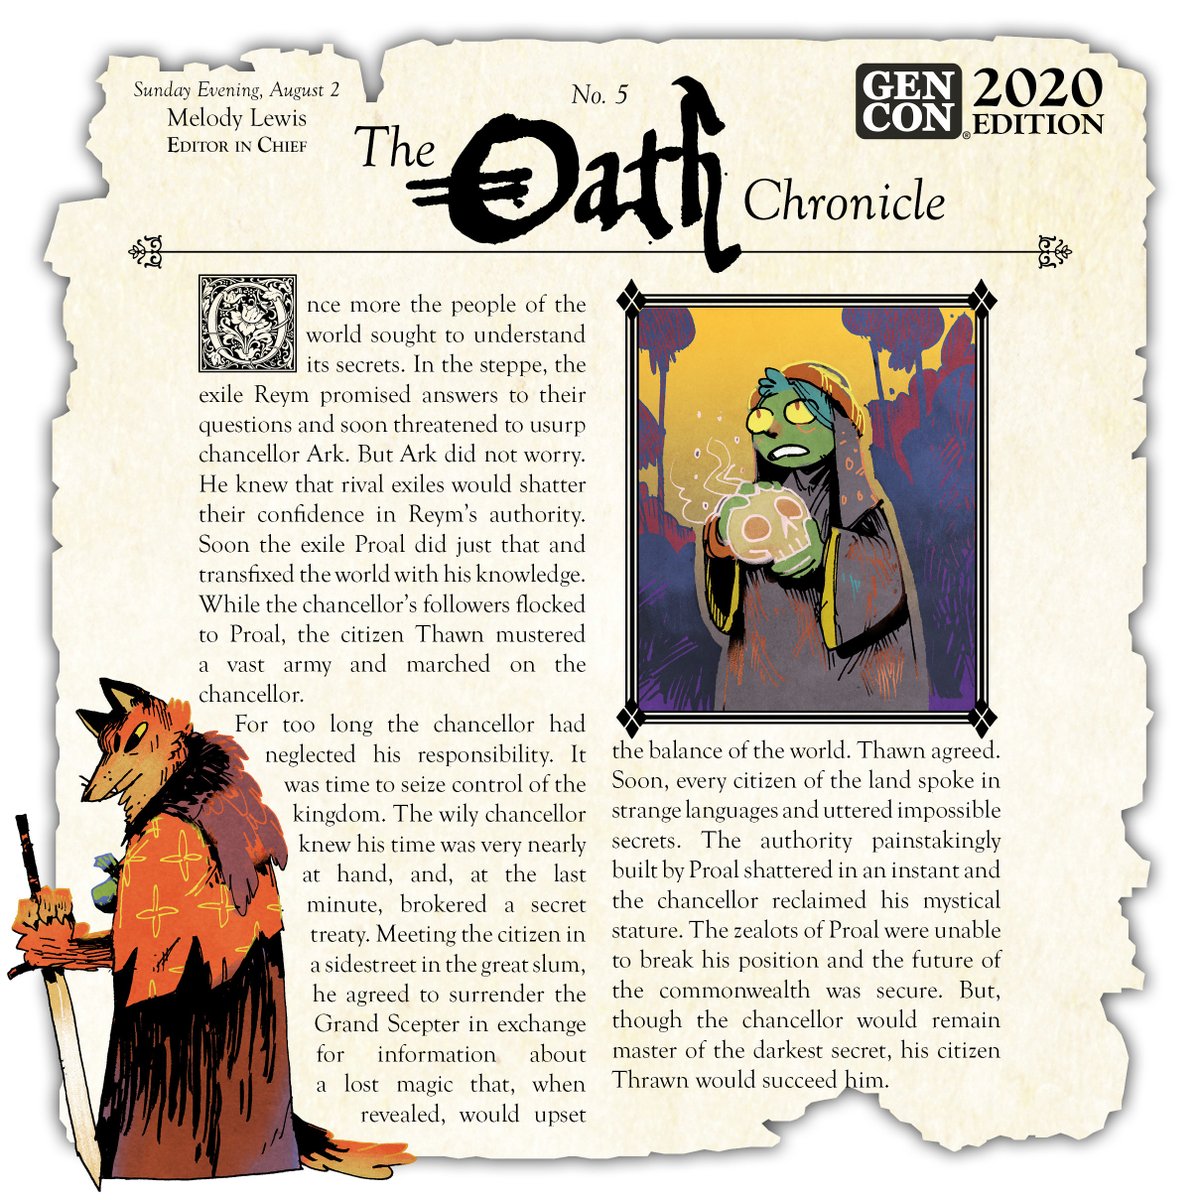 'The wily chancellor knew his time was very nearly at hand, and, at the last minute, brokered a secret treaty...'

The final installment... 

The Oath Chronicle No. 5 #OathGenCon #GenConOnline #OathBoardGame